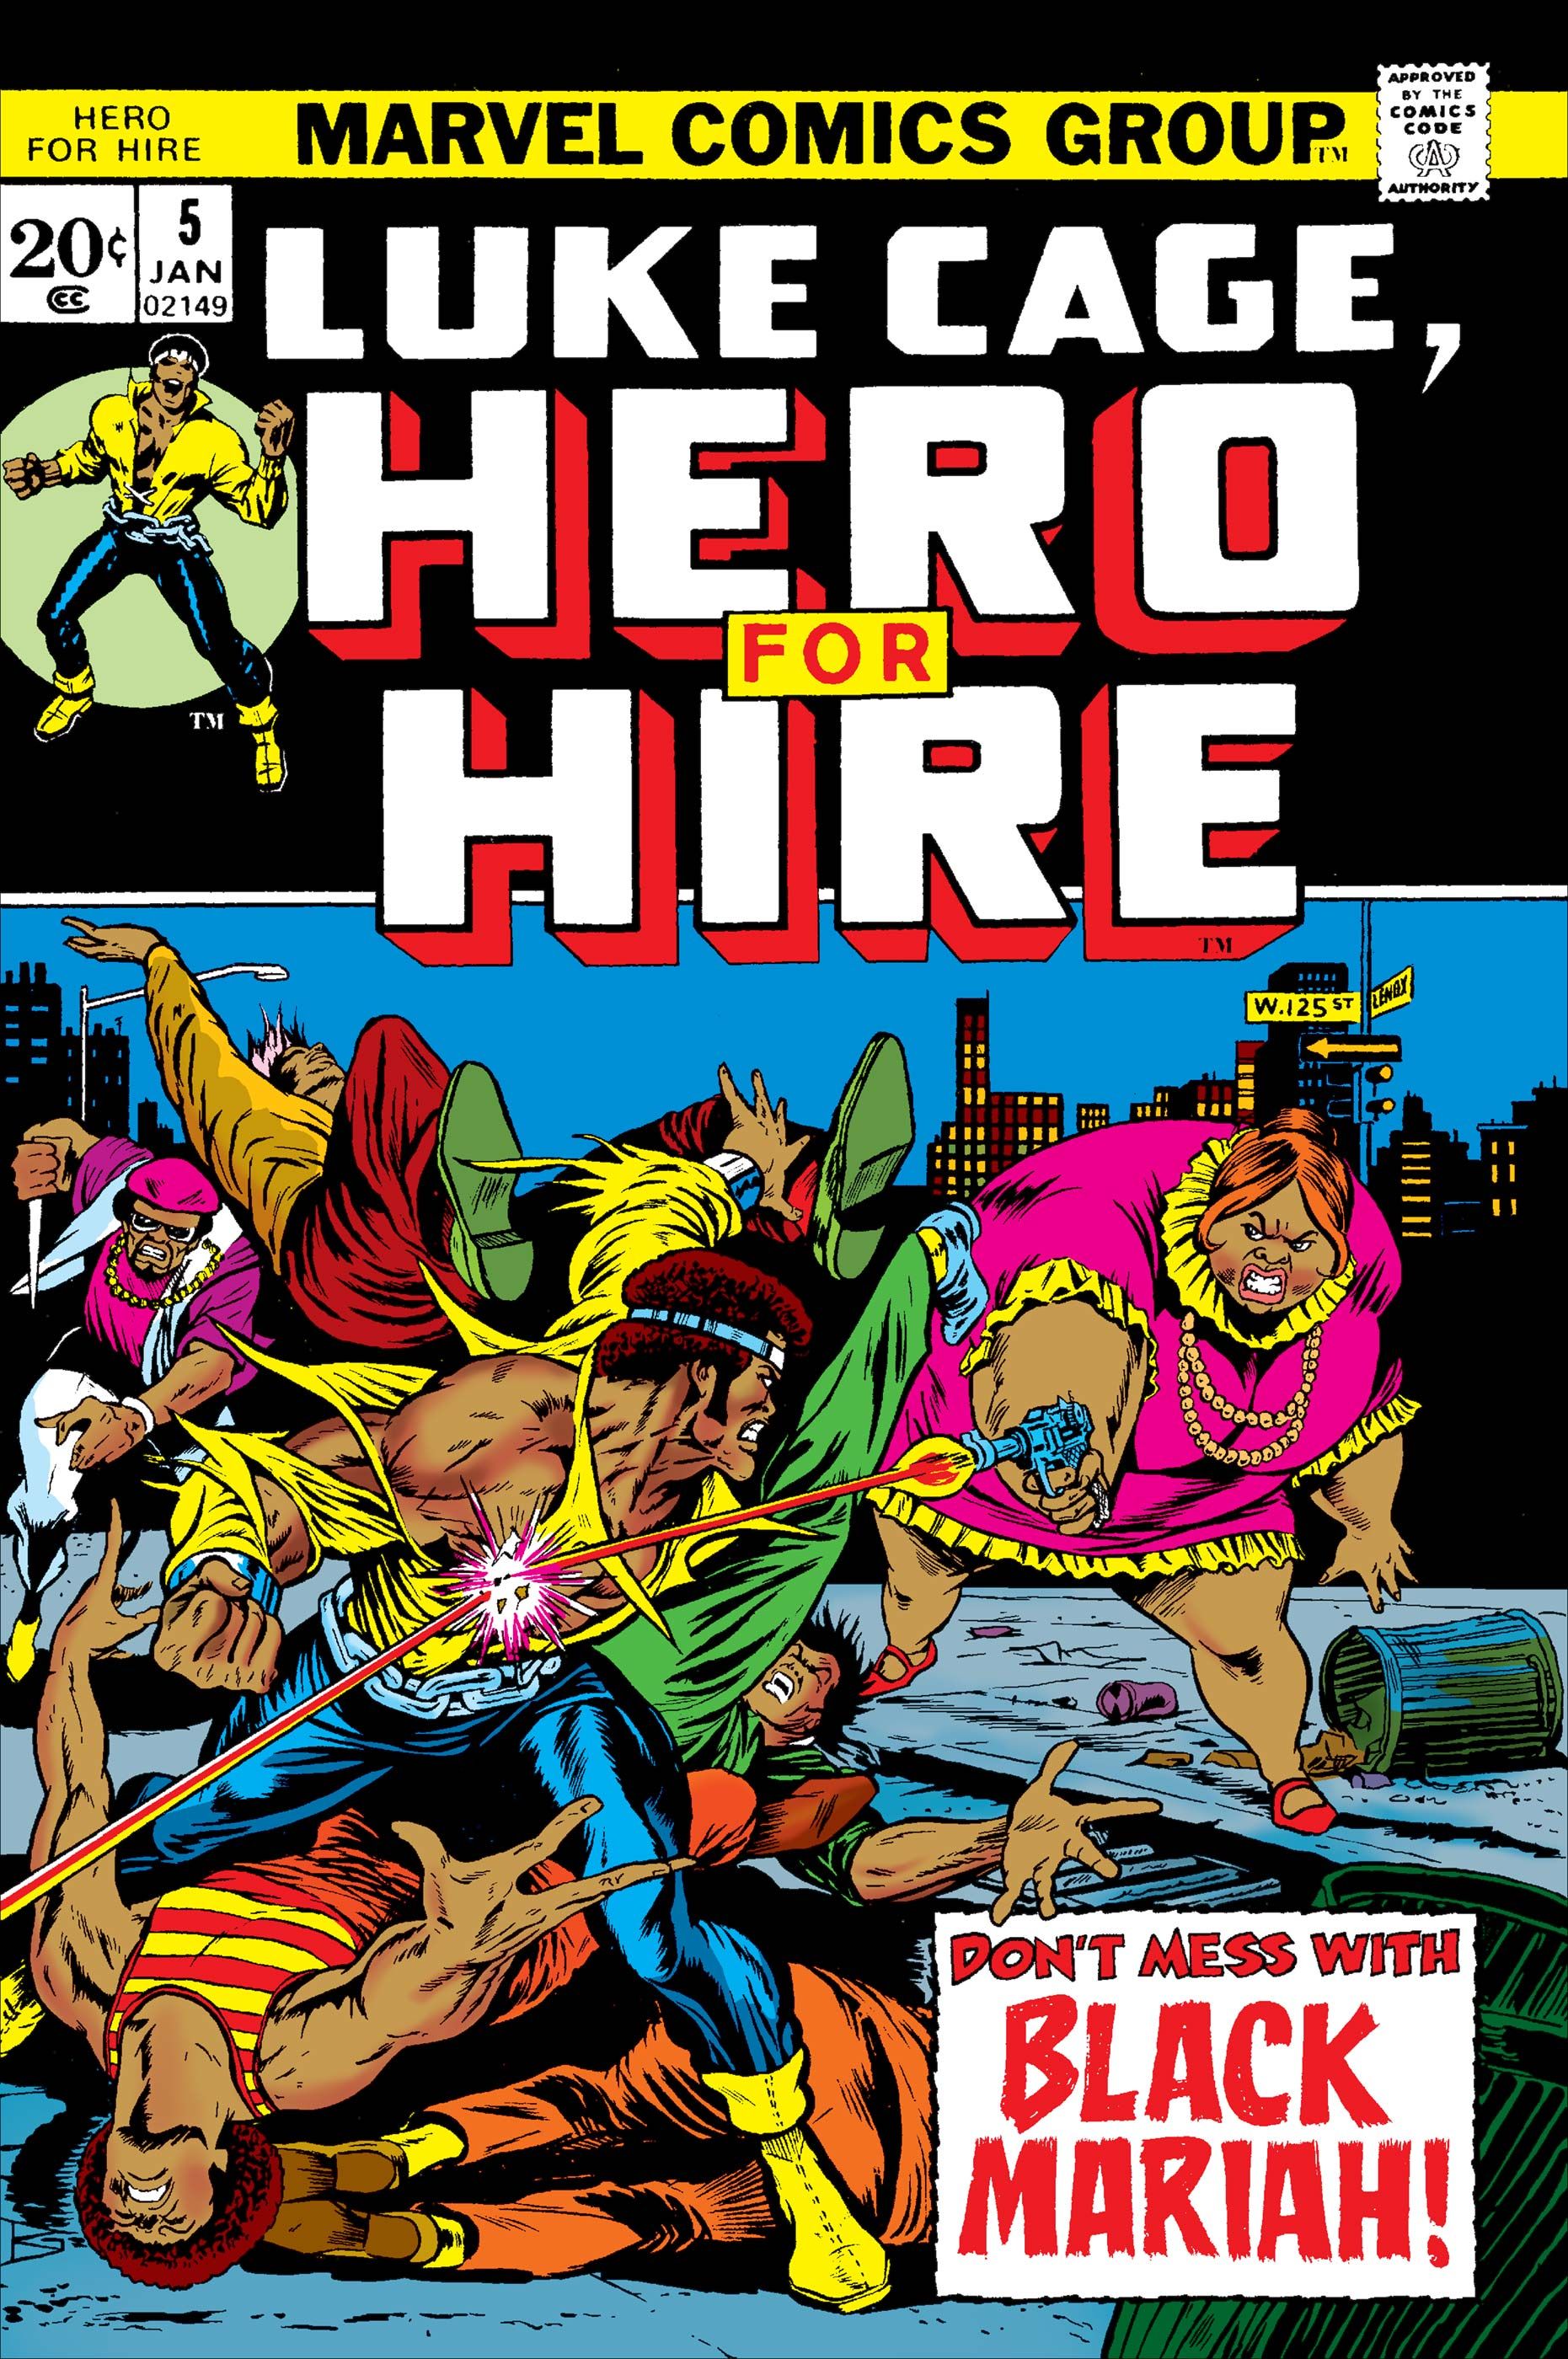 Luke Cage fights Black Mariah on the cover of Hero for Hire #5